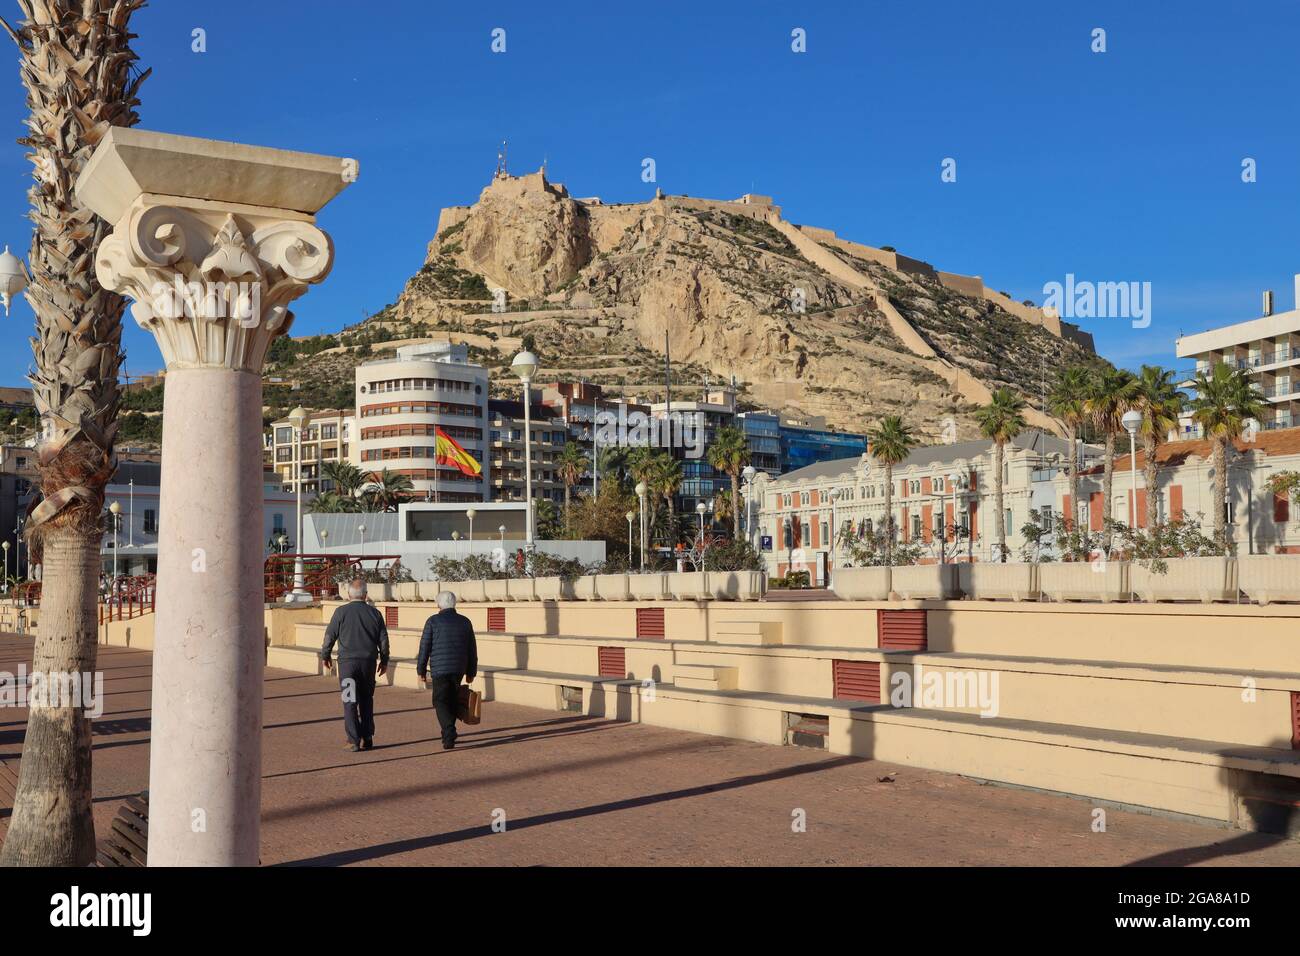 The castle of Santa Barbara high up on a promontory overlooking the city of Alicante, Spain with the esplanade and people walking in the foreground Stock Photo